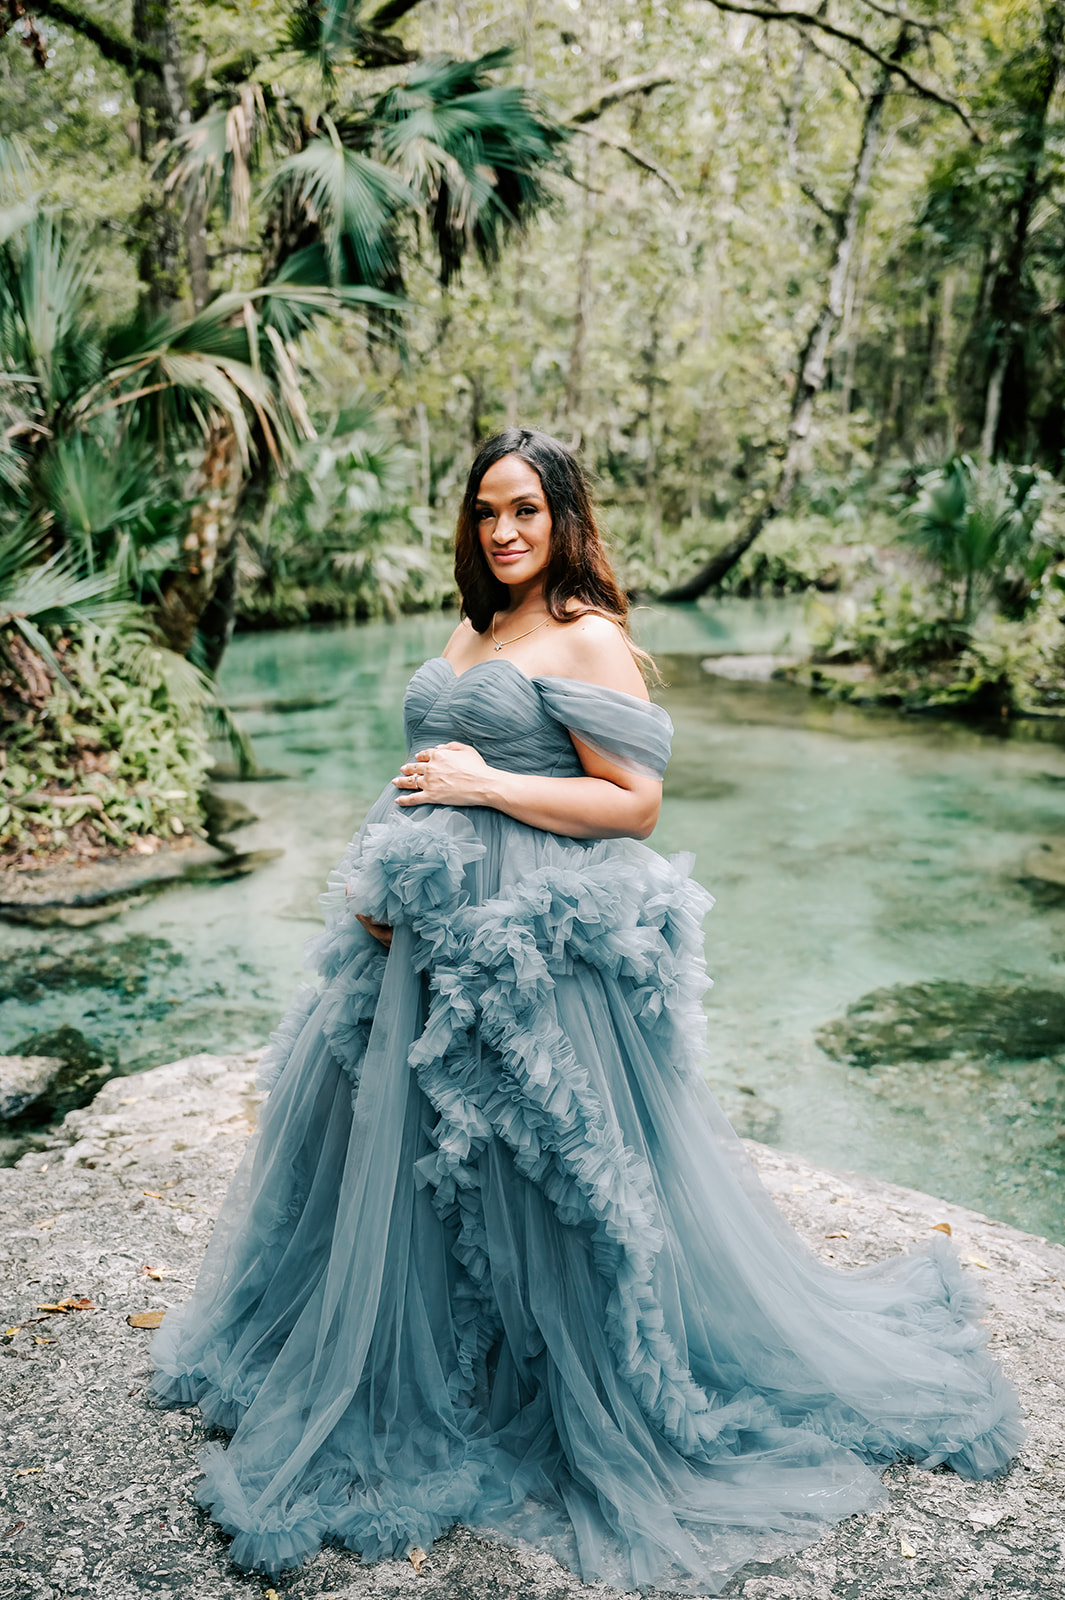 A mom to be in a long flowing tule maternity gown stands on a rock by a flowing clear river after visiting Moonshadow Medical Massage